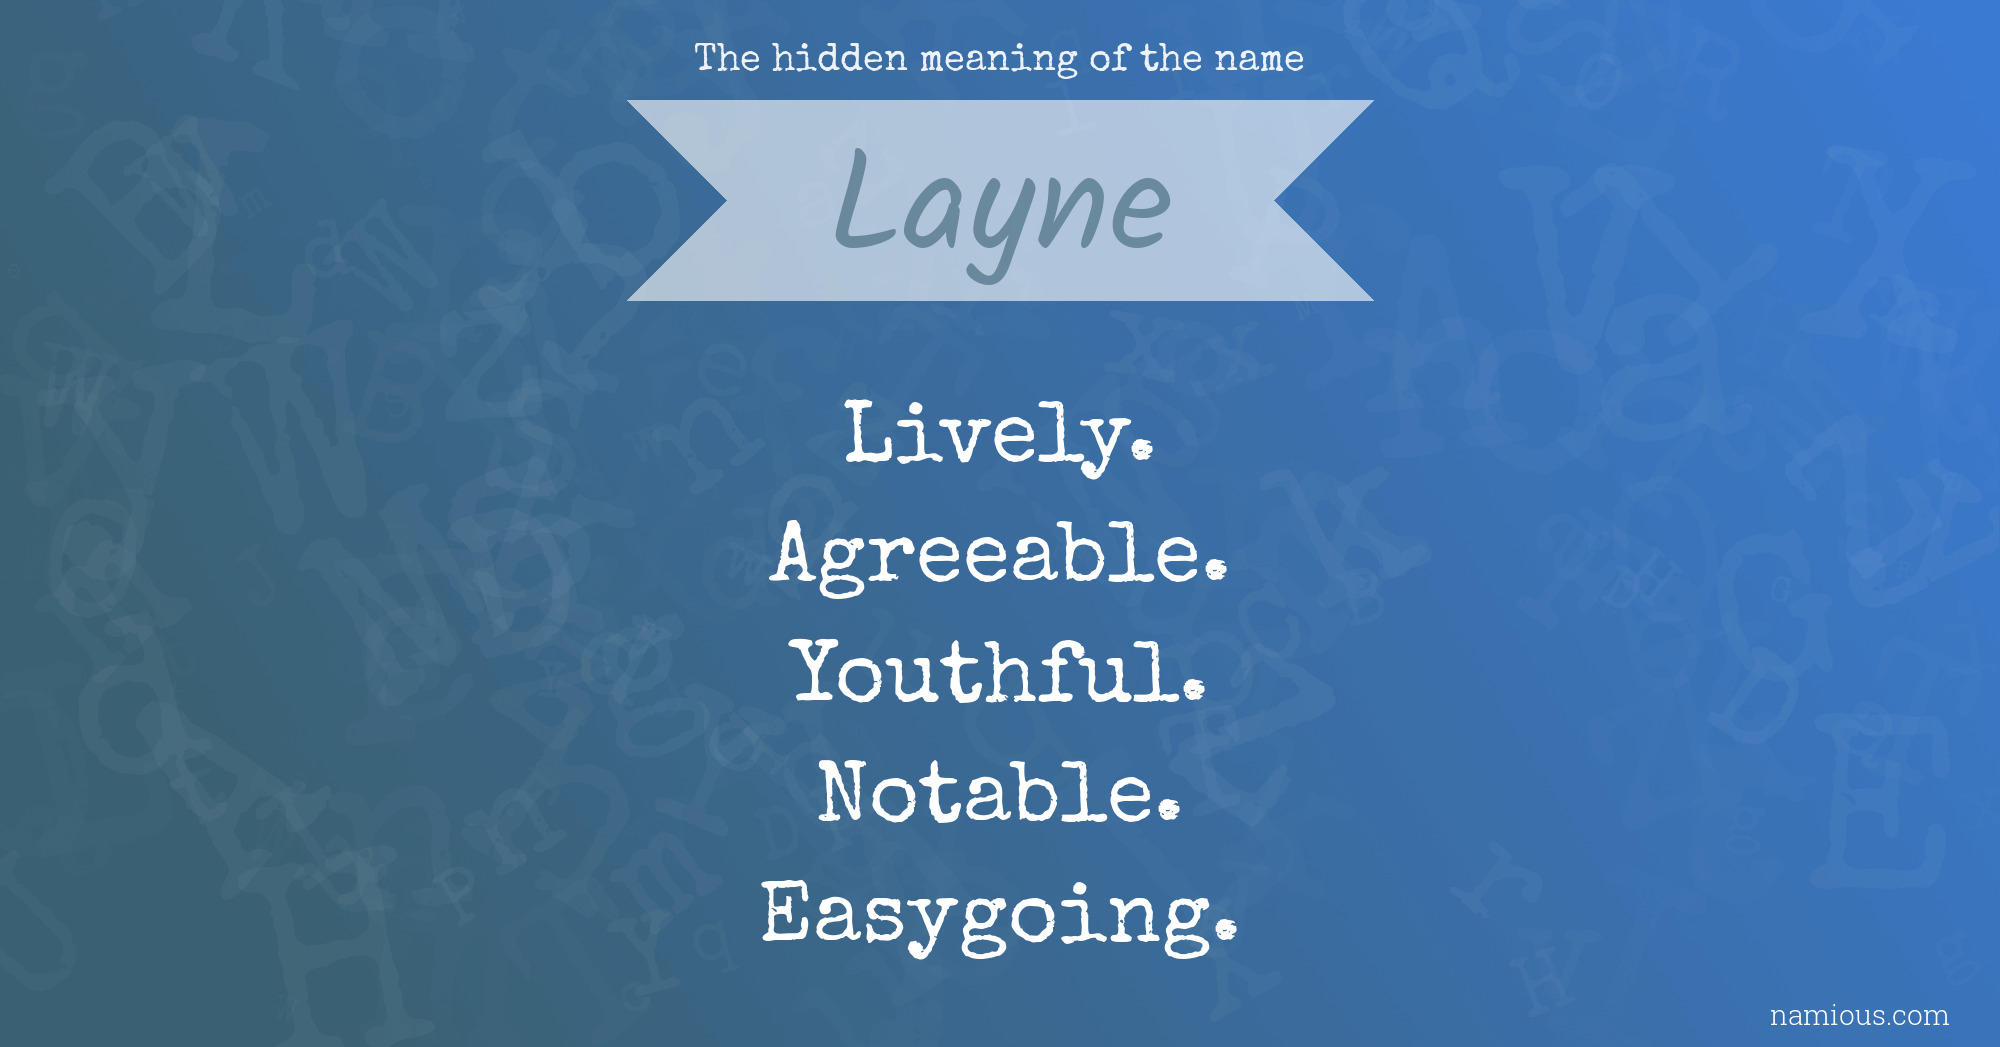 The hidden meaning of the name Layne | Namious